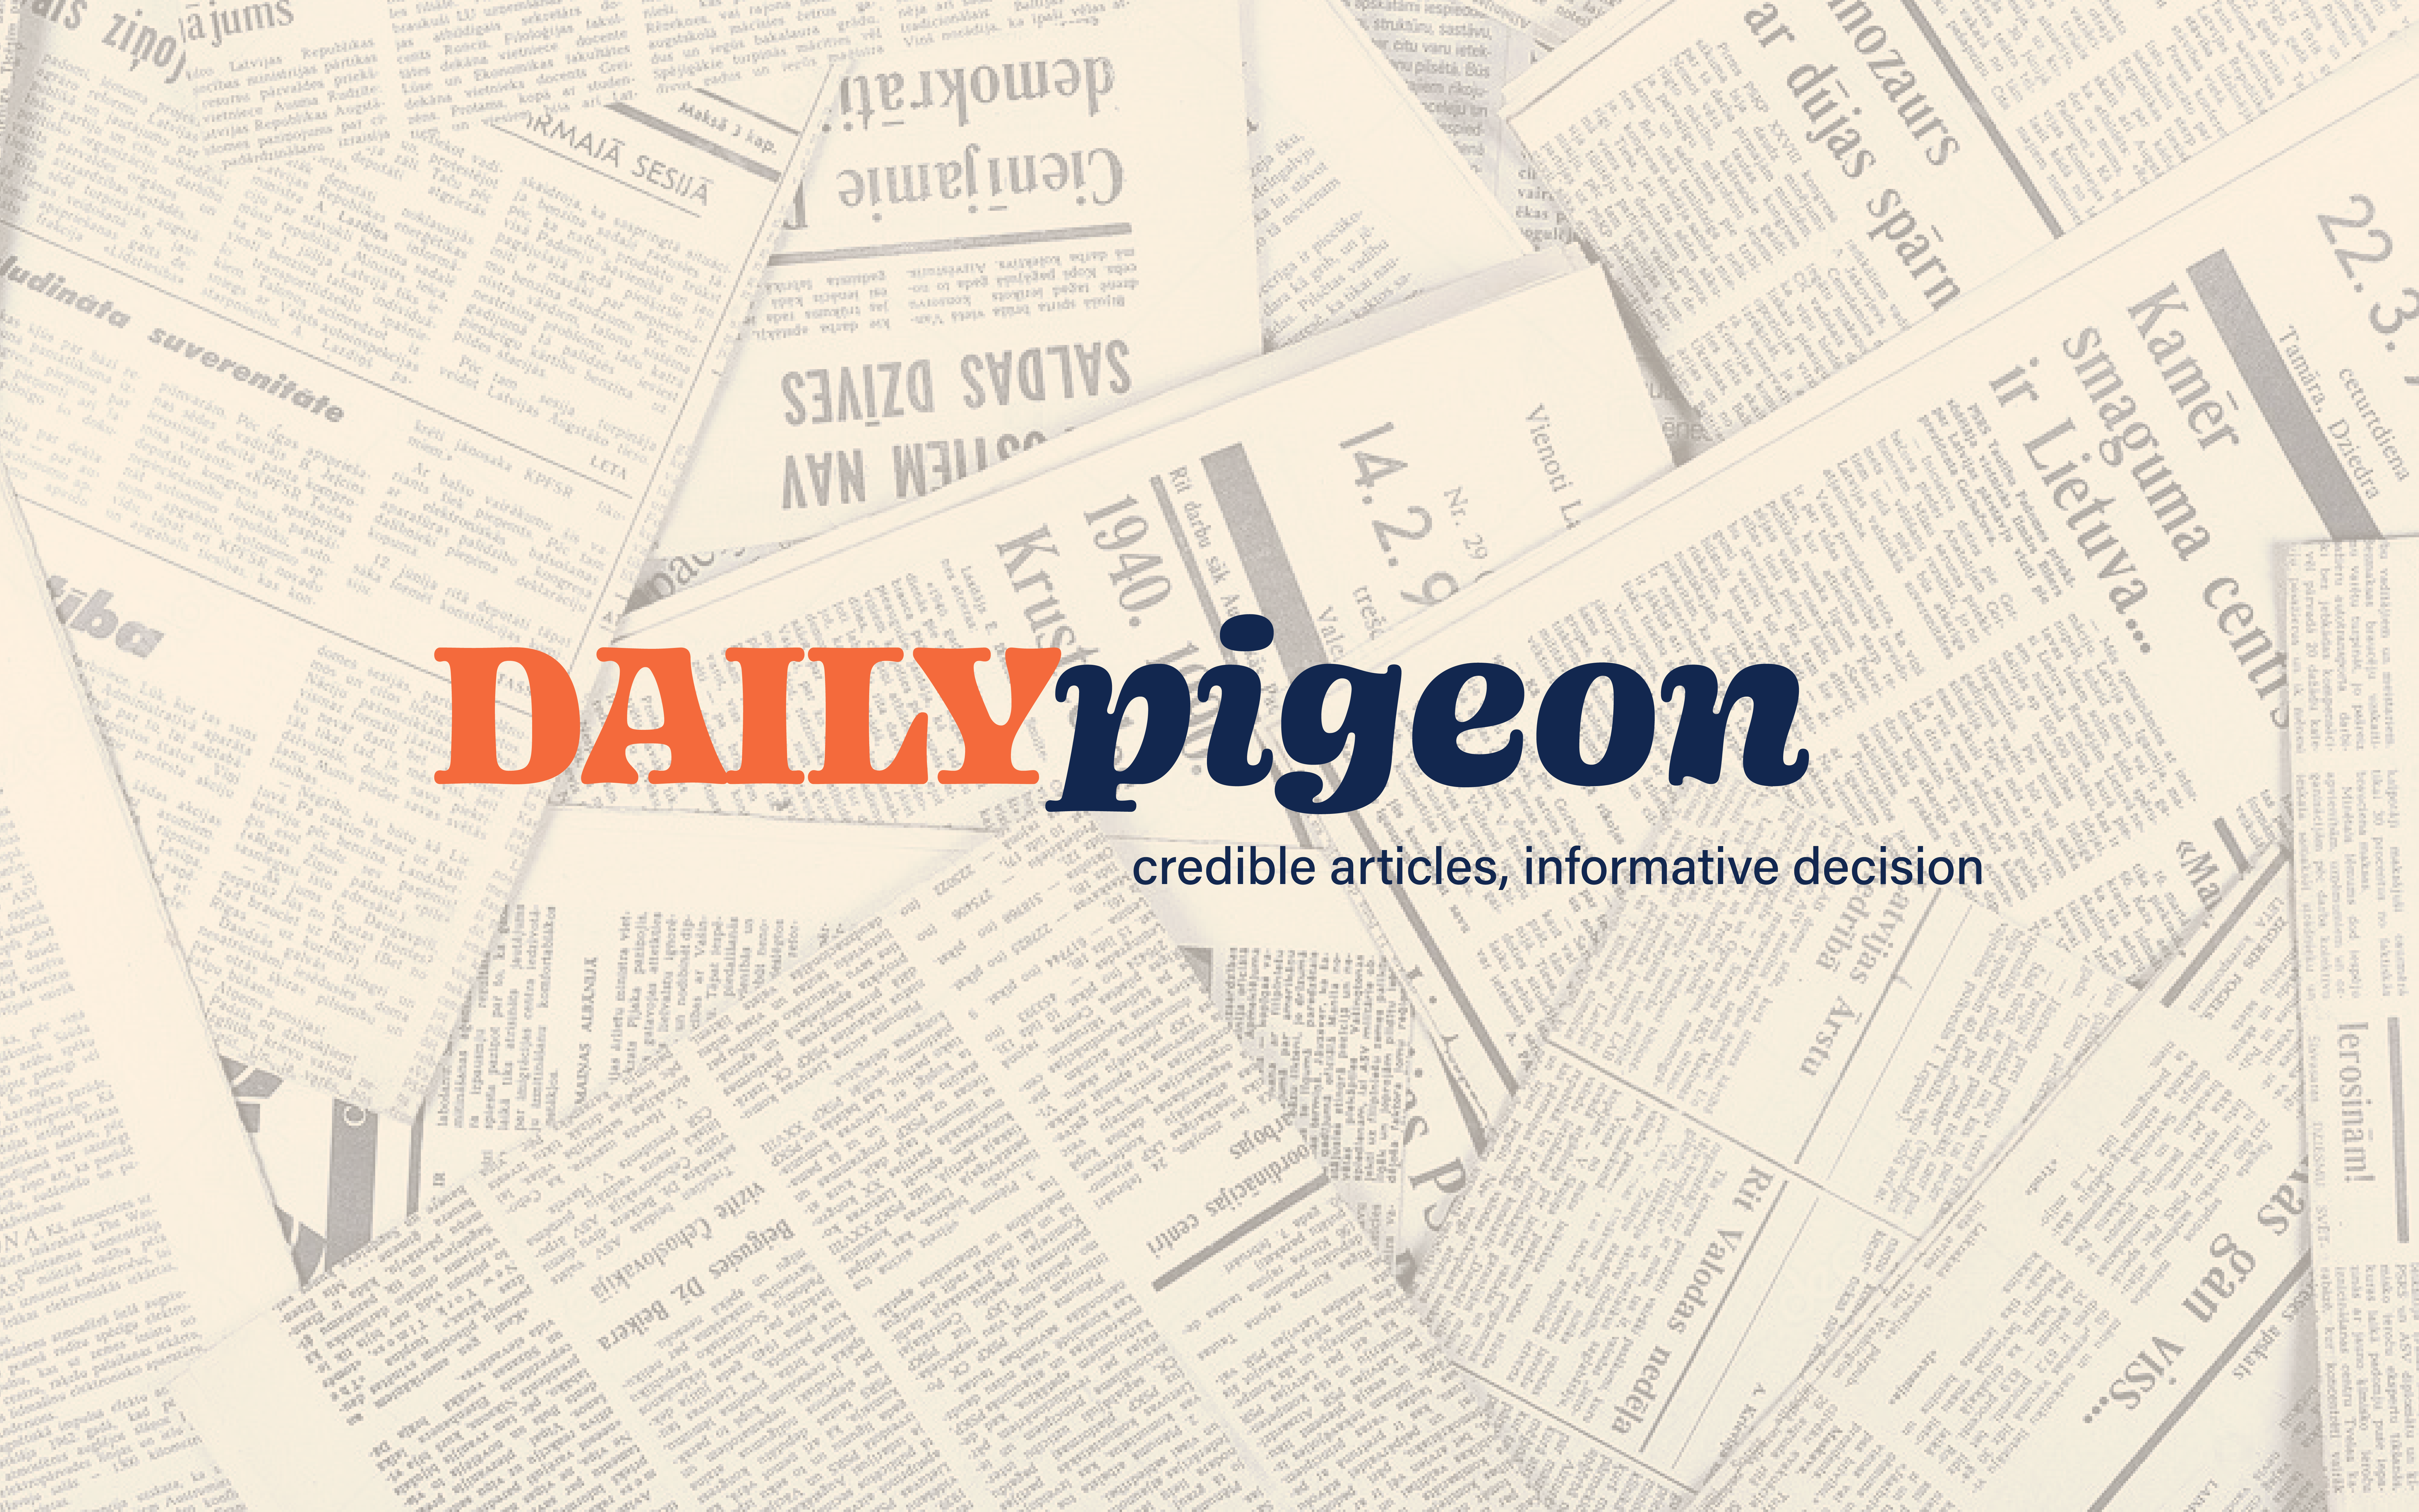 the daily pigeon application ux ui design pigeon project banner image with texture background newspaper